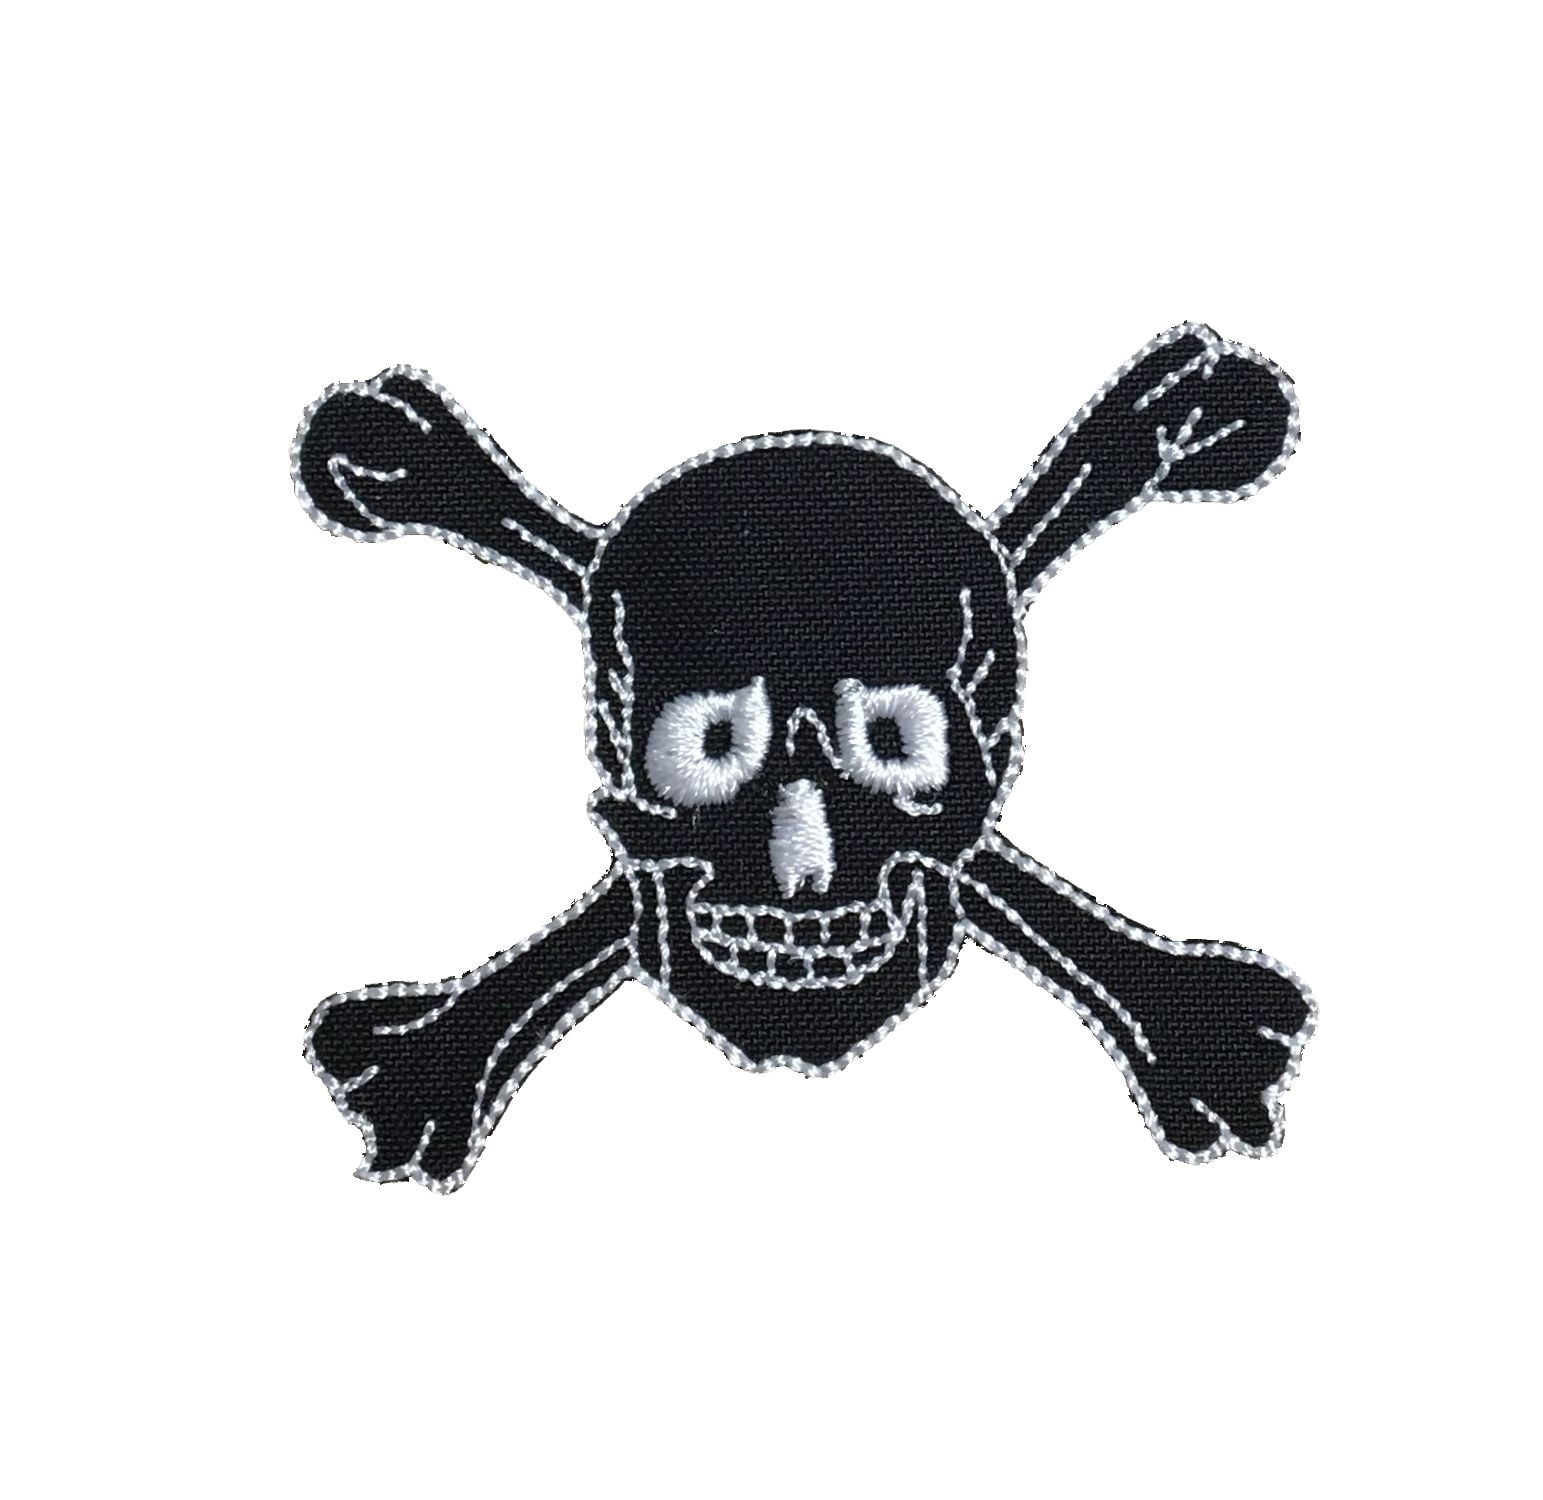 SILVER & BLACK SKULL & CROSSBONES Iron On Sew On Embroidered Patch 